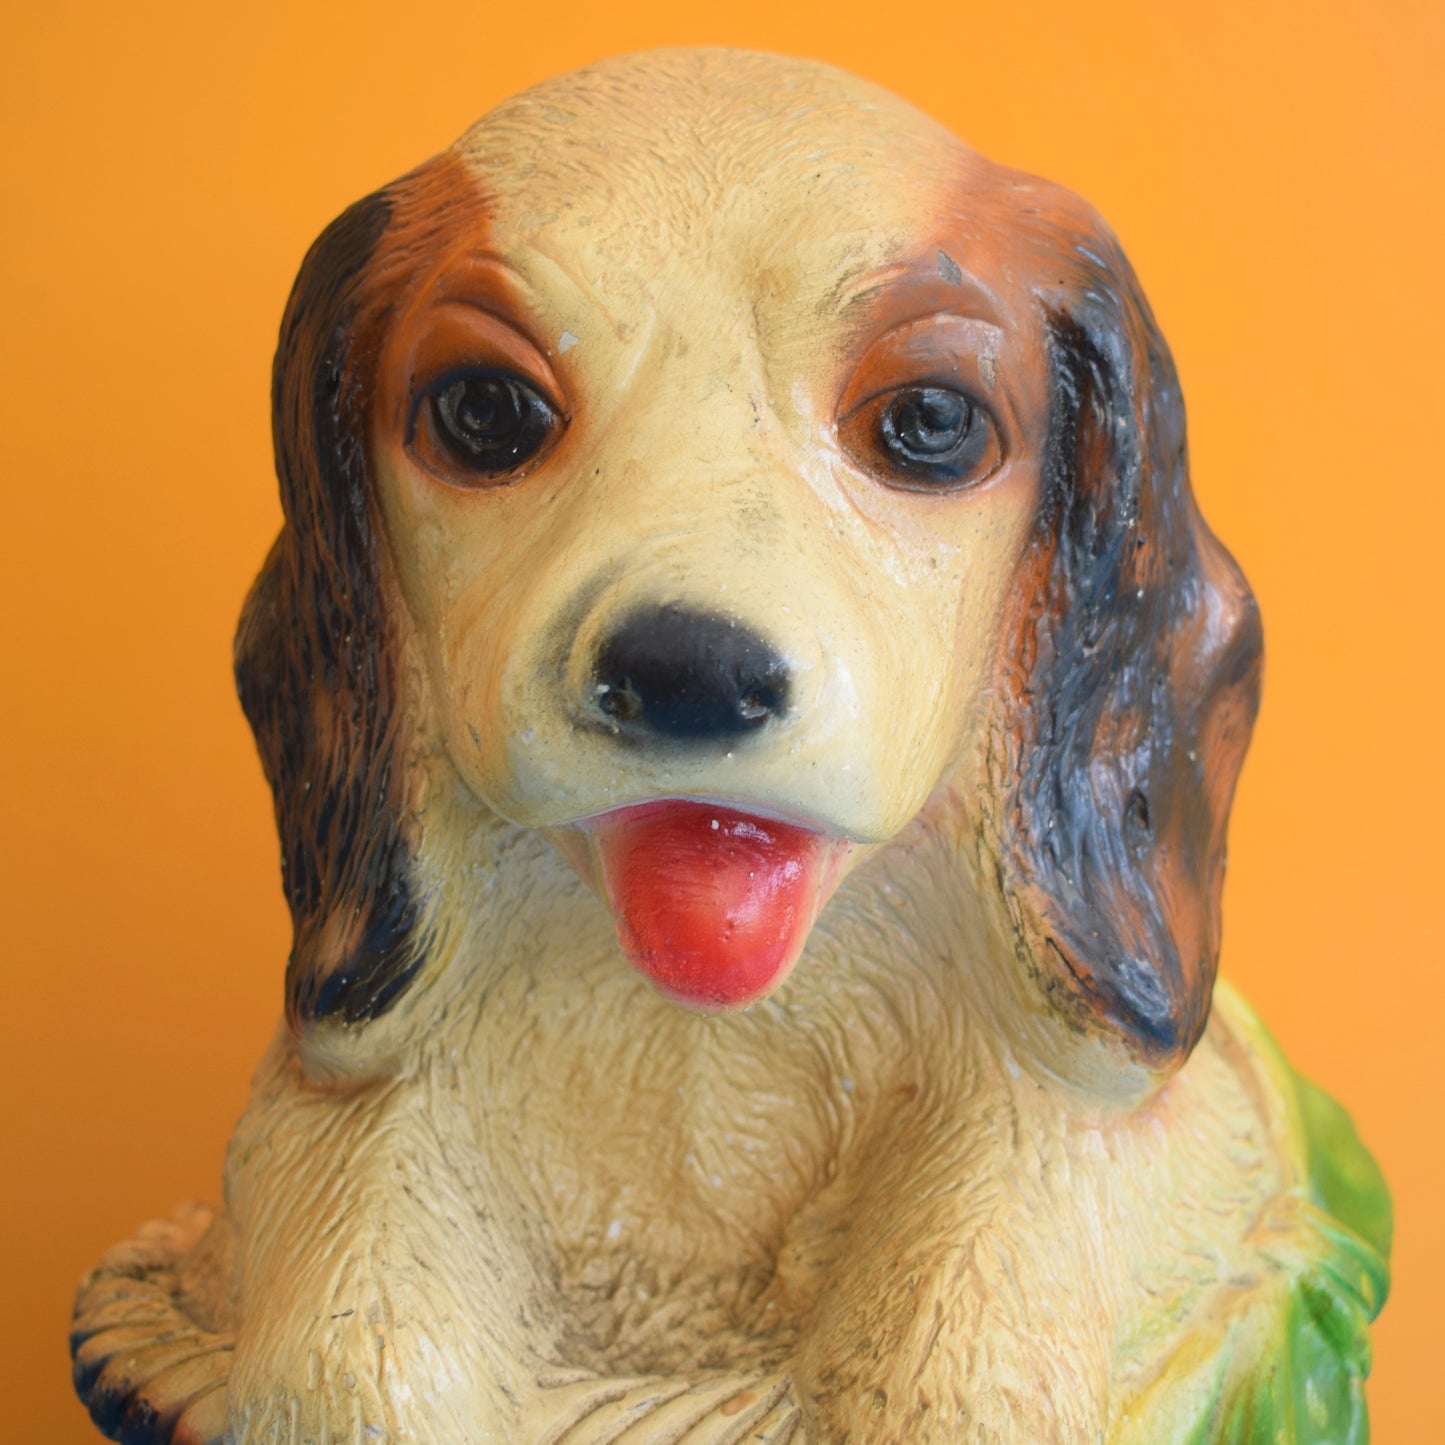 Vintage 1950s Plaster Home Sweet Home Doggy Statue